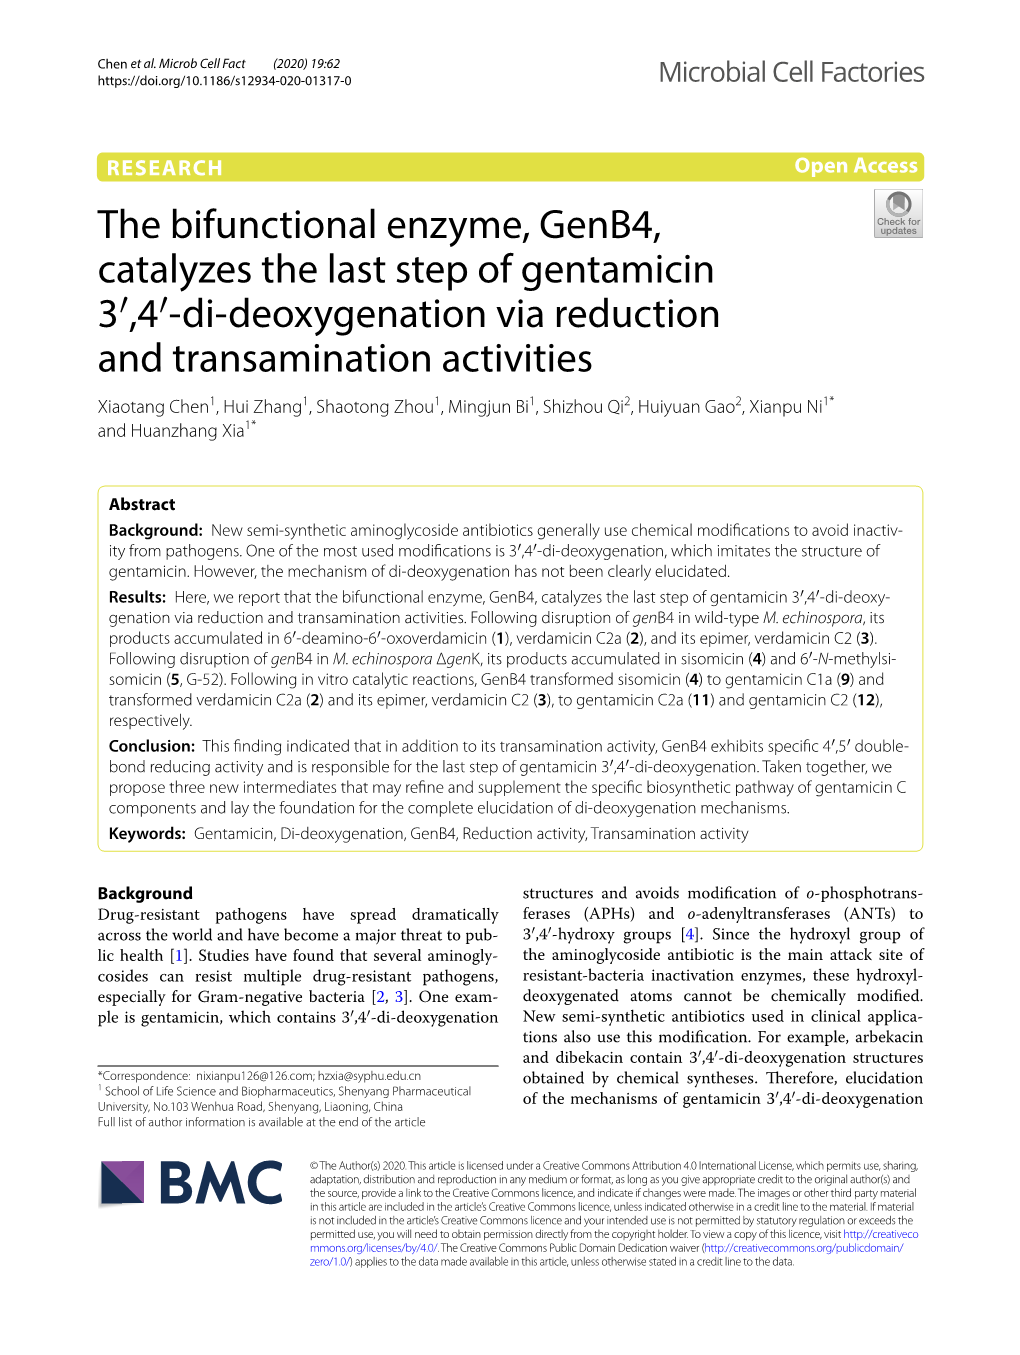 The Bifunctional Enzyme, Genb4, Catalyzes the Last Step of Gentamicin